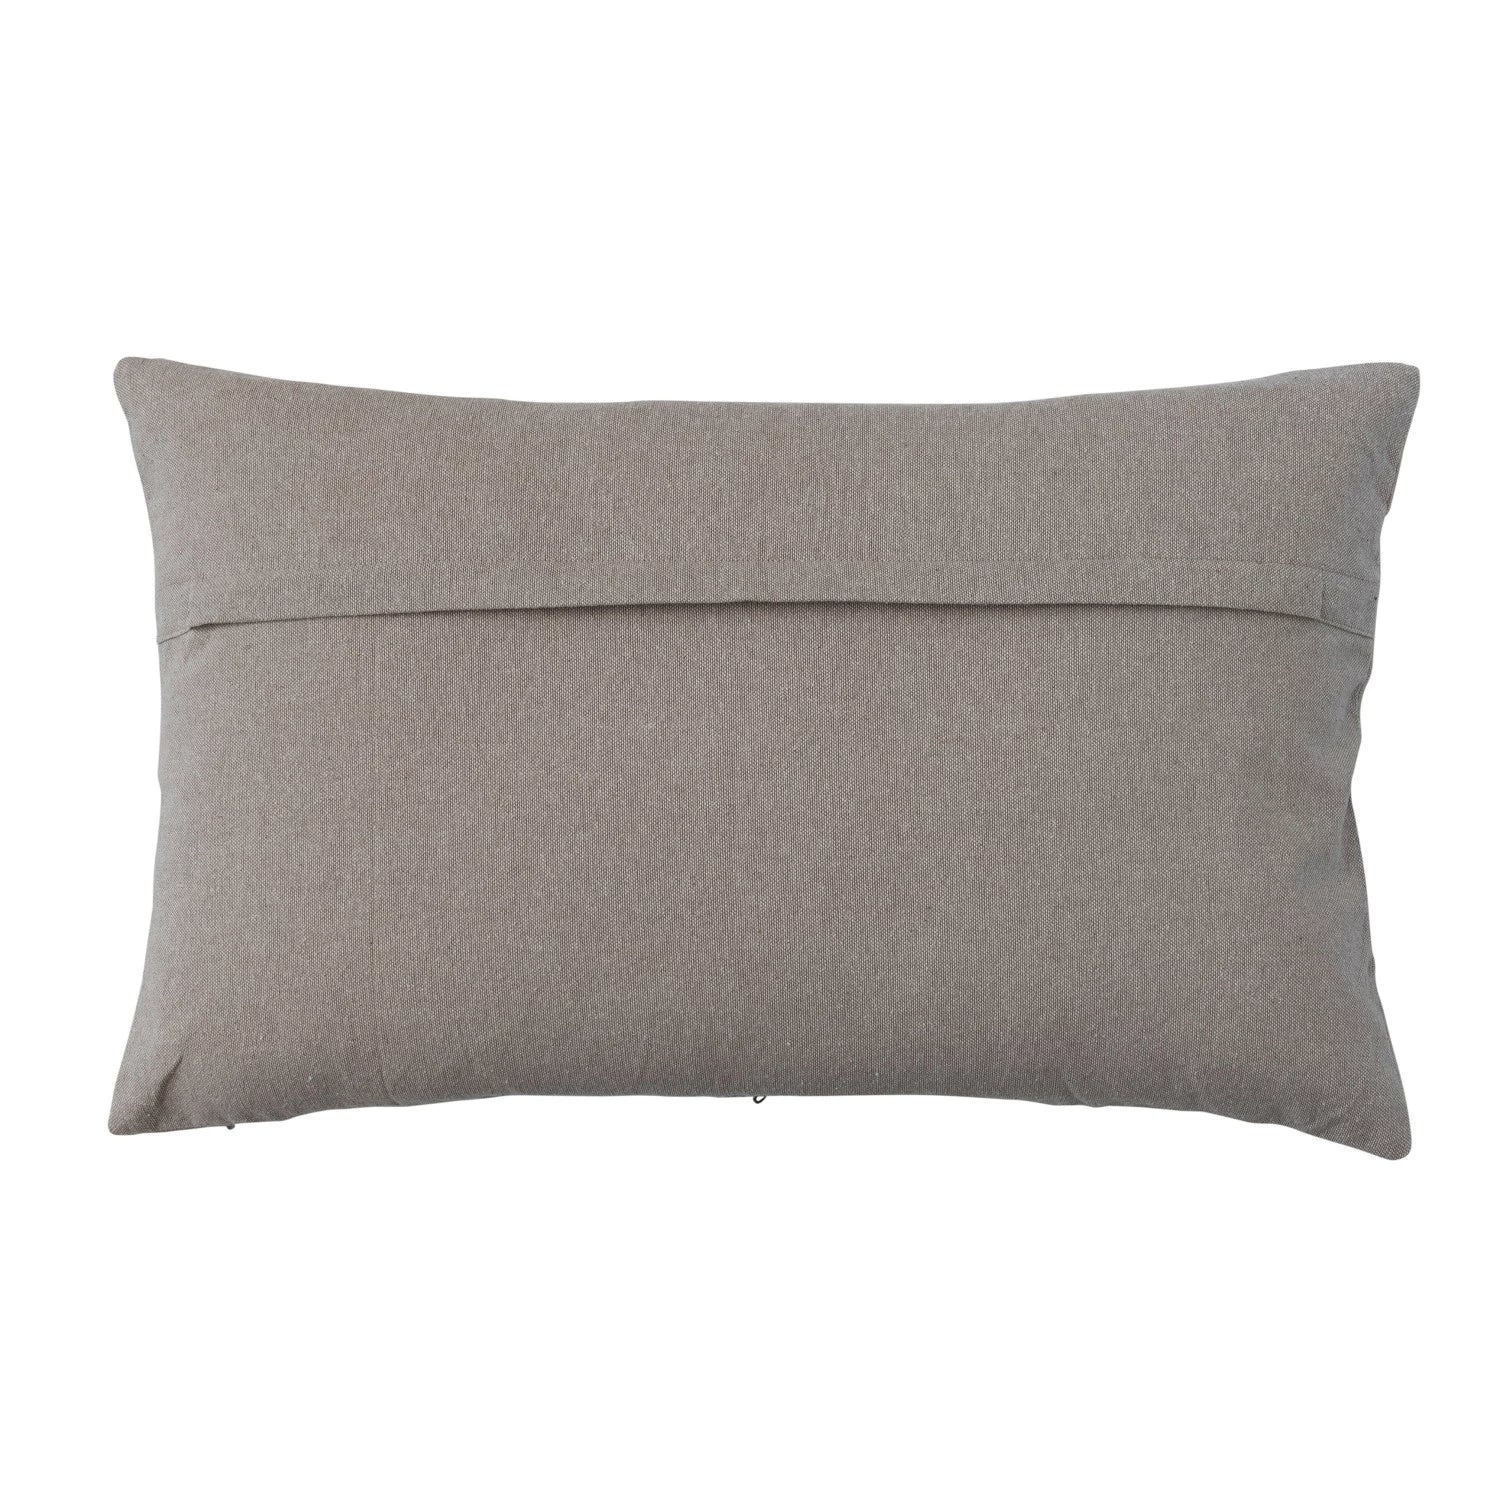 Cotton Slub Embroidered Lumbar Pillow with Polyester Filling